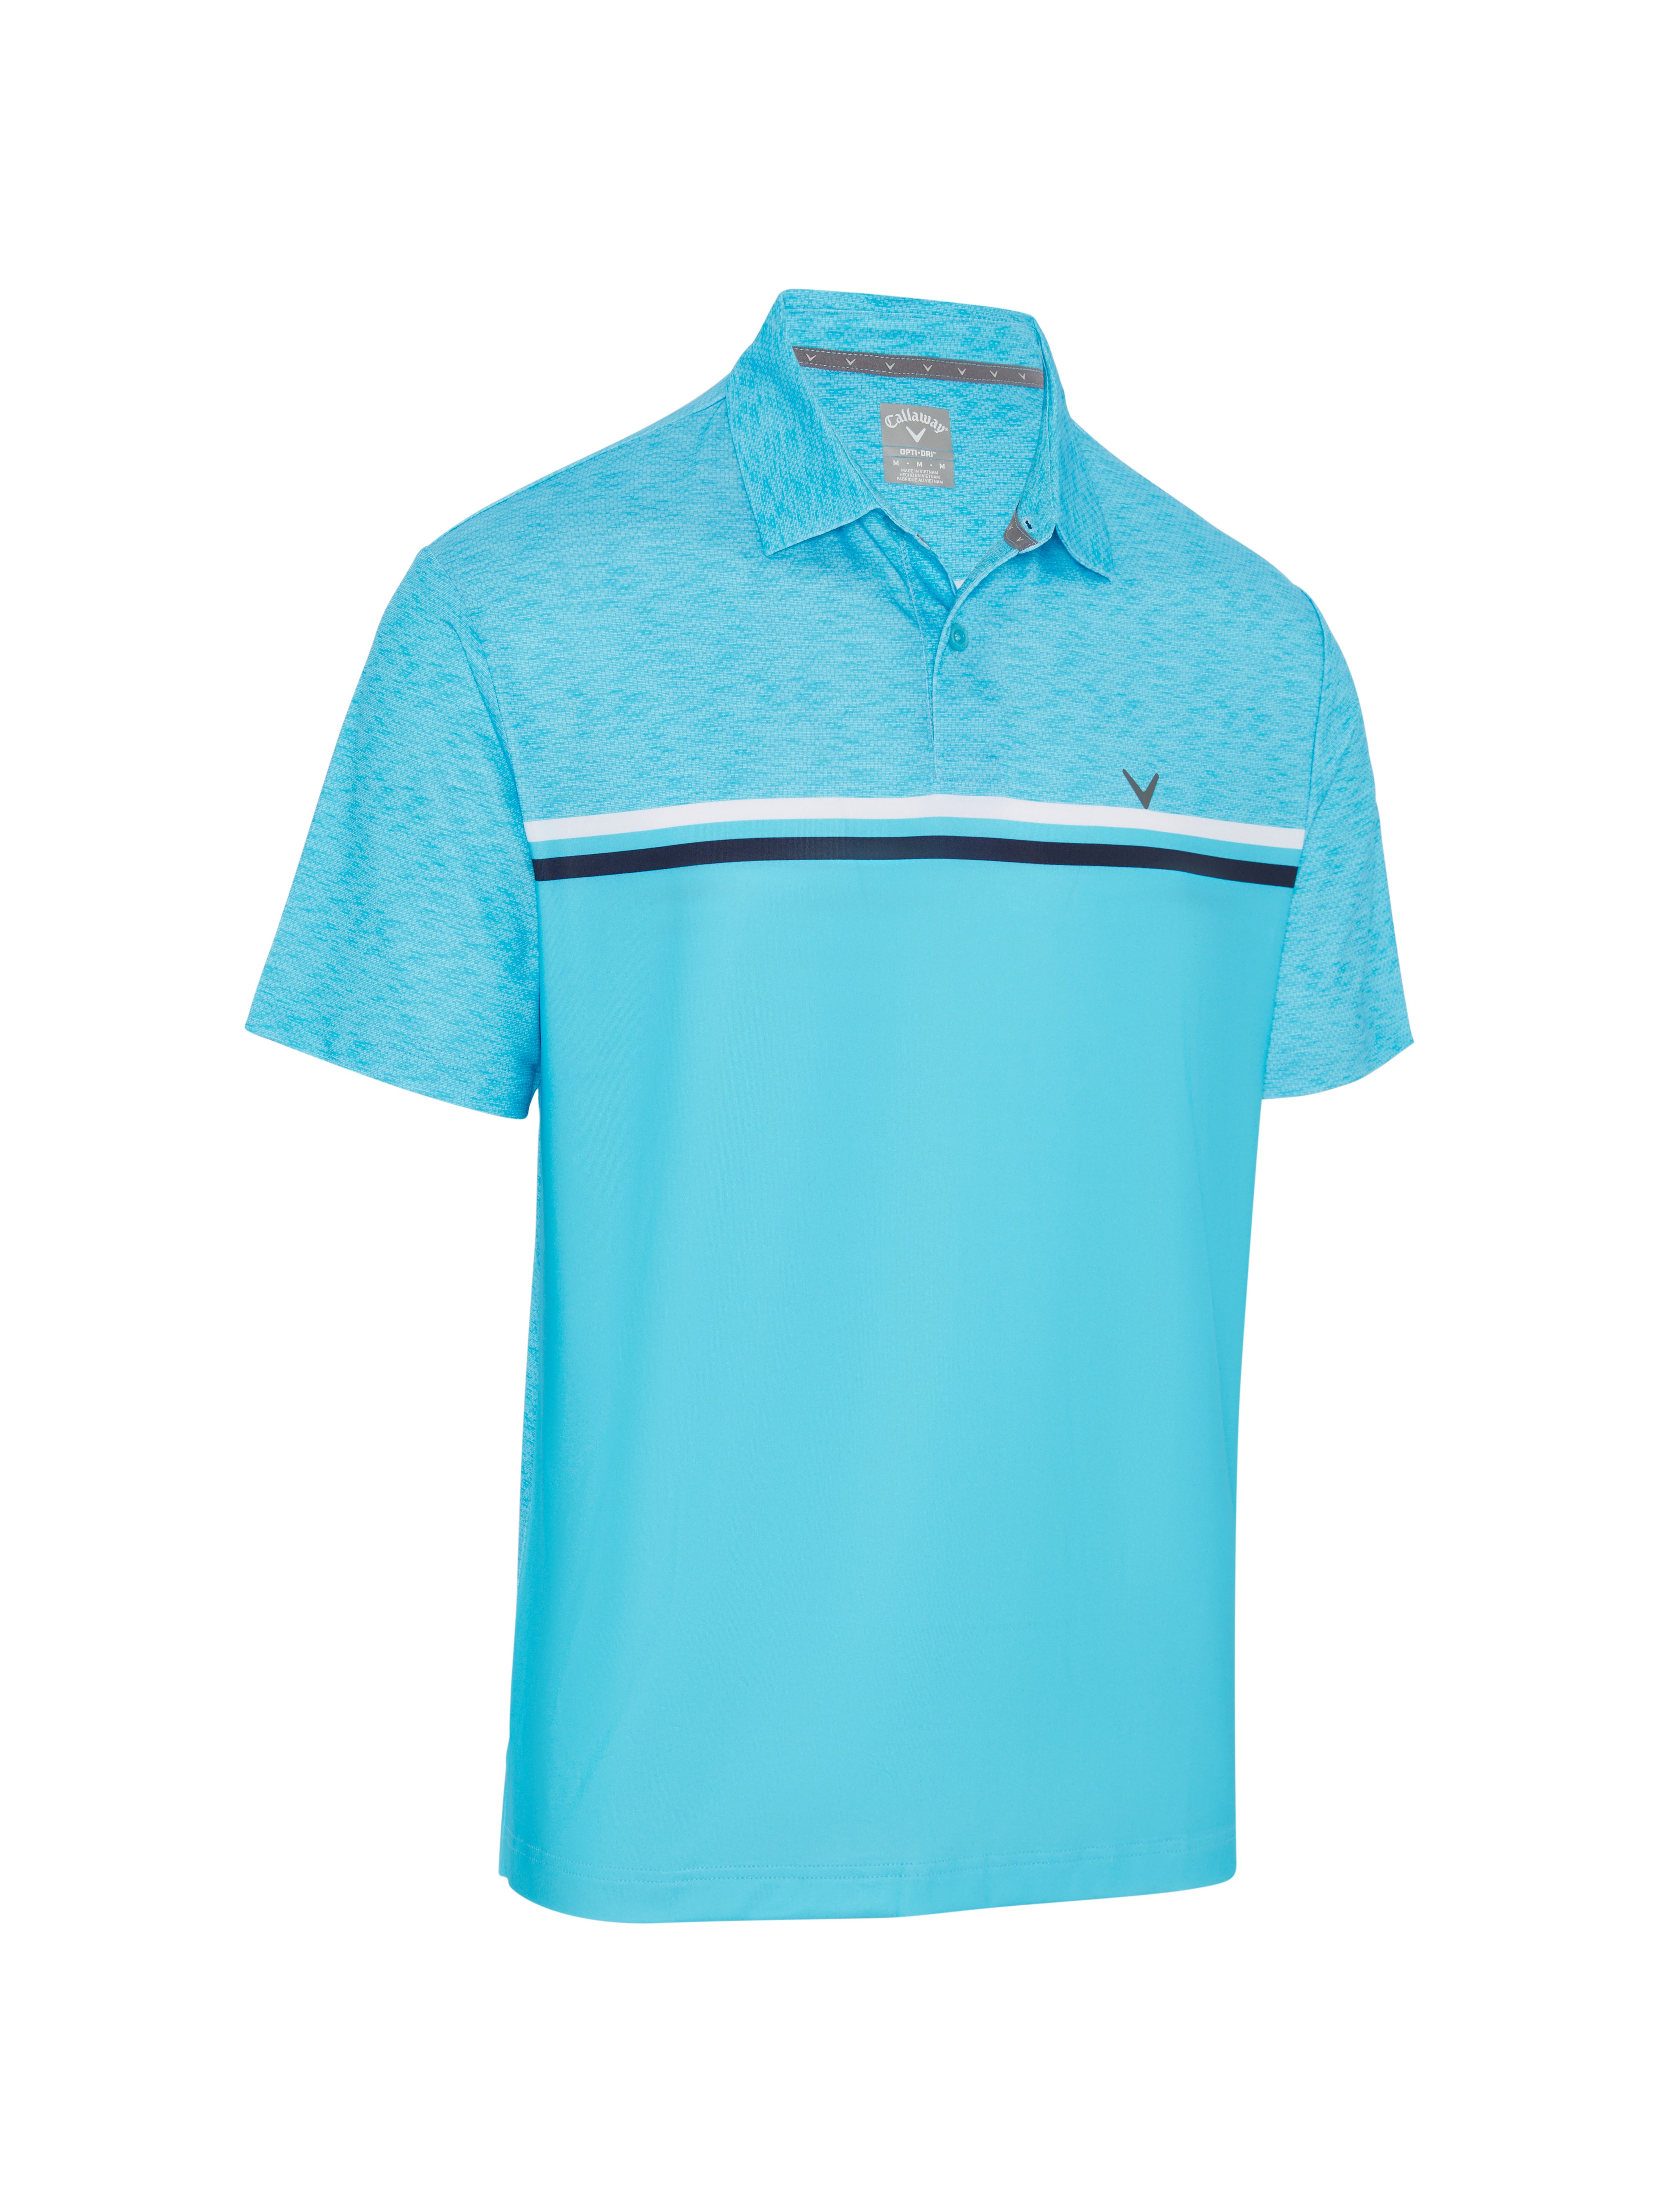 View Short Sleeve Engineered Printed Block Polo Shirt In River Blue information